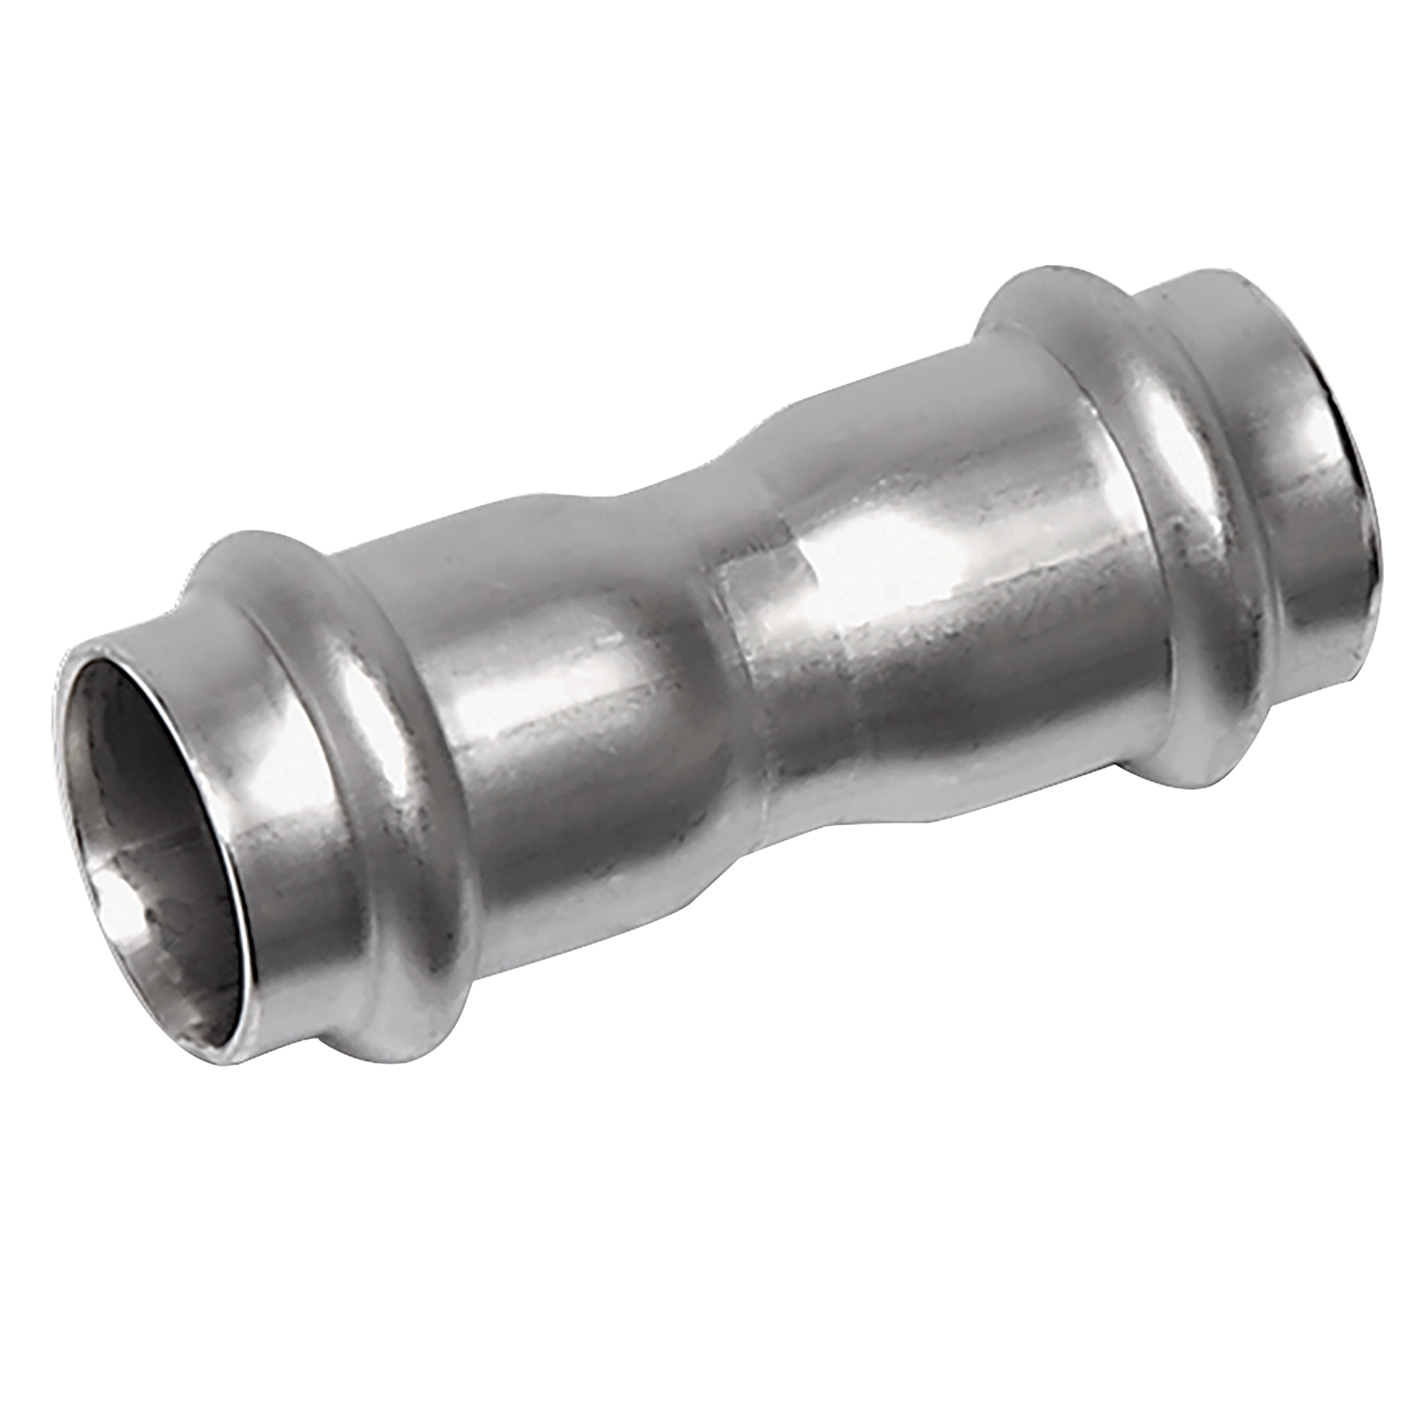 35MM S9000 STRAIGHTAIGHT COUPLING